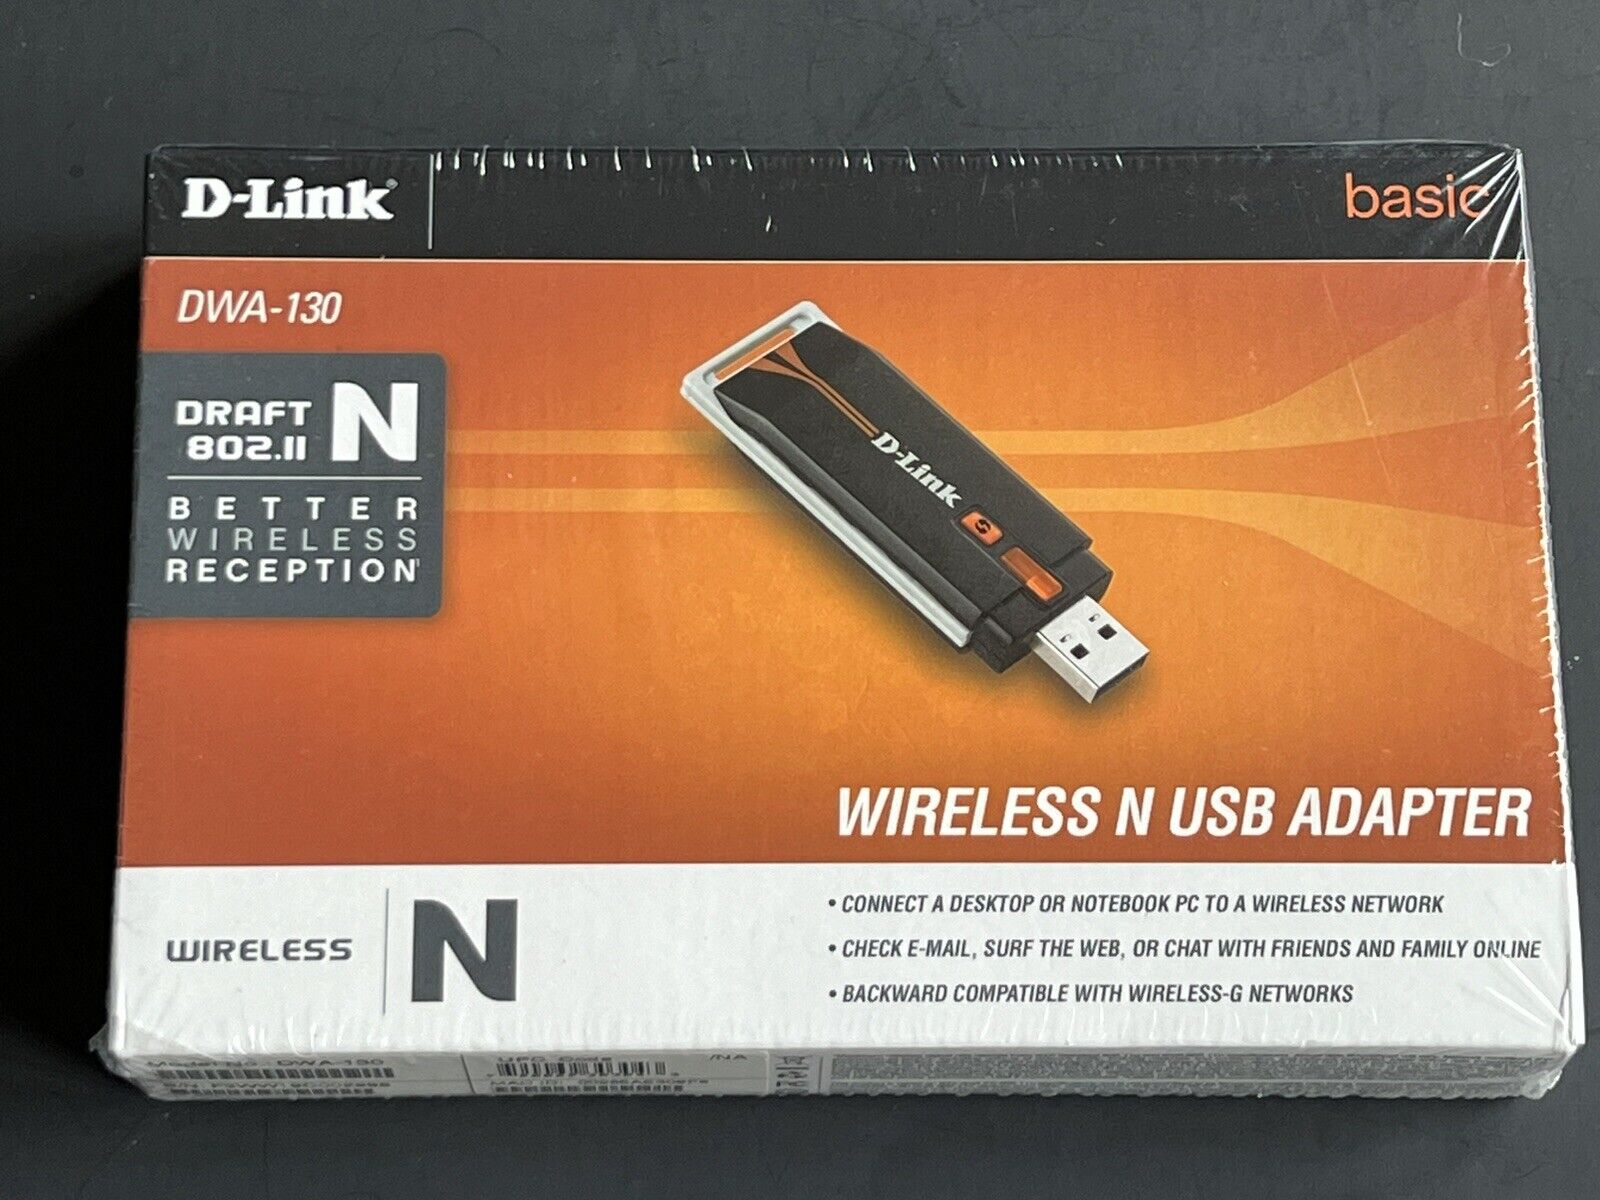 D-link DWA-130 (790069303043) Wireless Adapter. New. Factory Sealed.